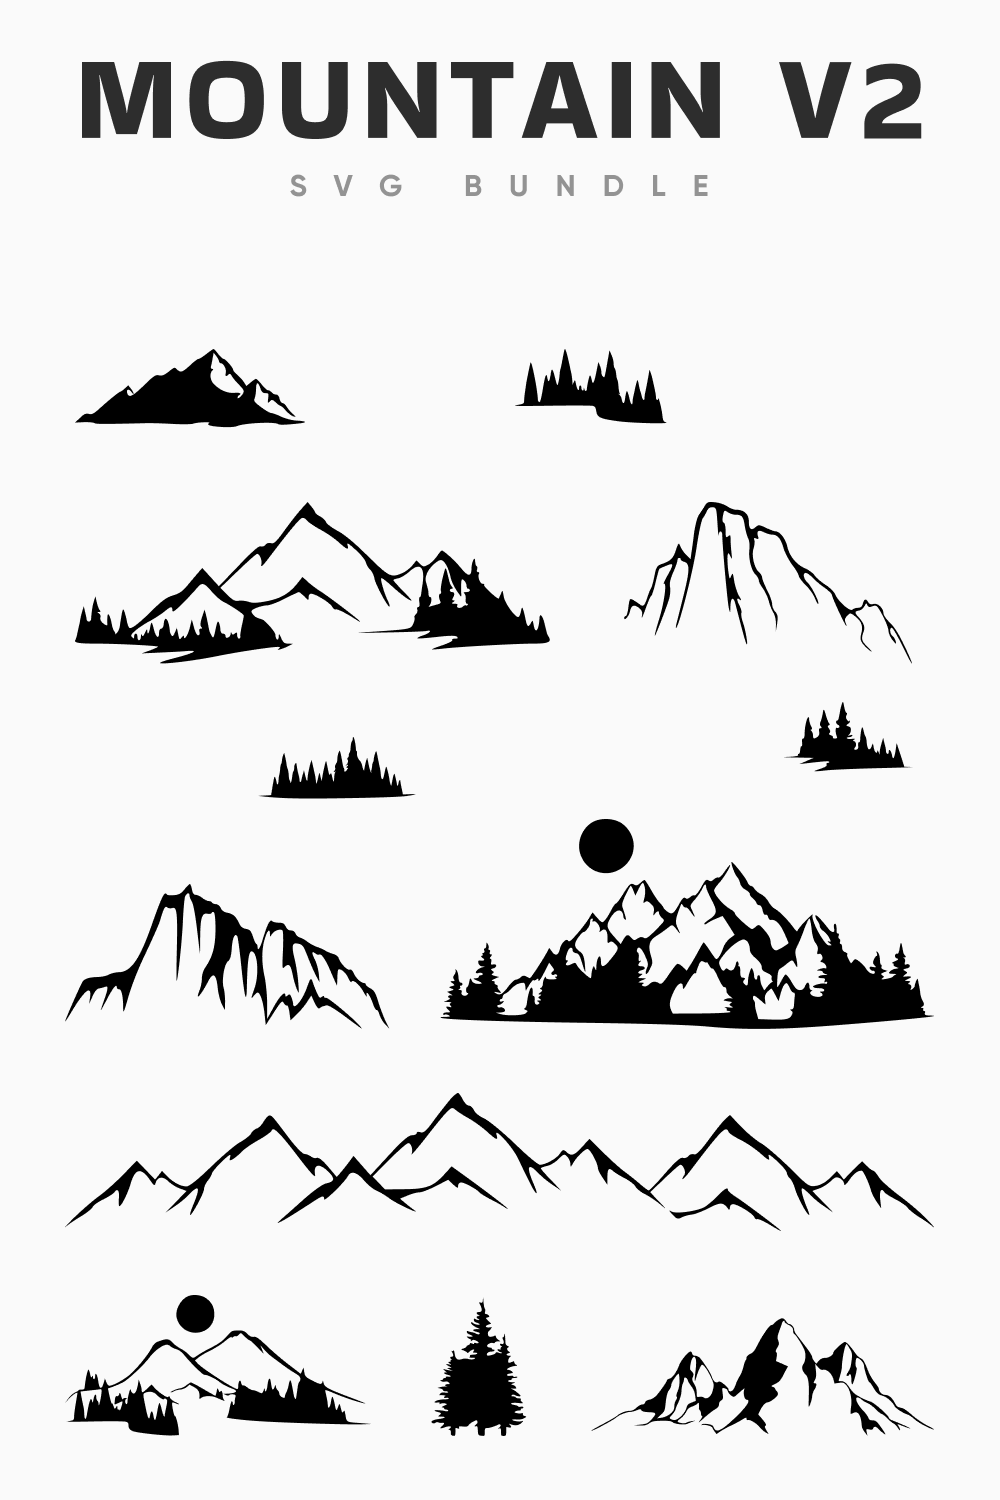 Different mountains with different time frames.